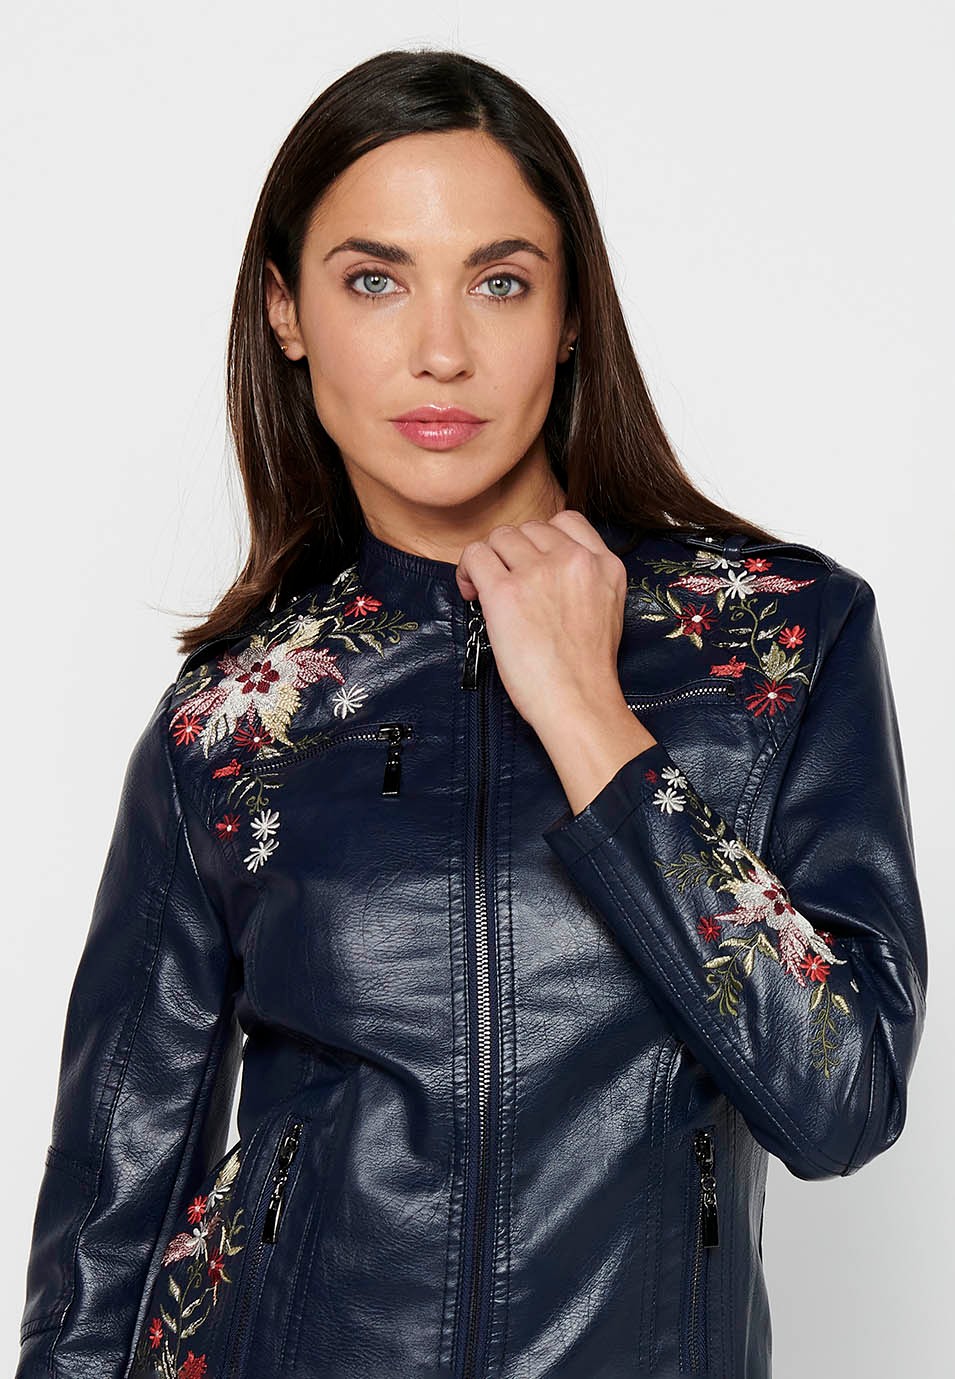 Leather-effect jacket with front zipper closure with floral embroidered details with round neck and front pockets in Navy for Women 5